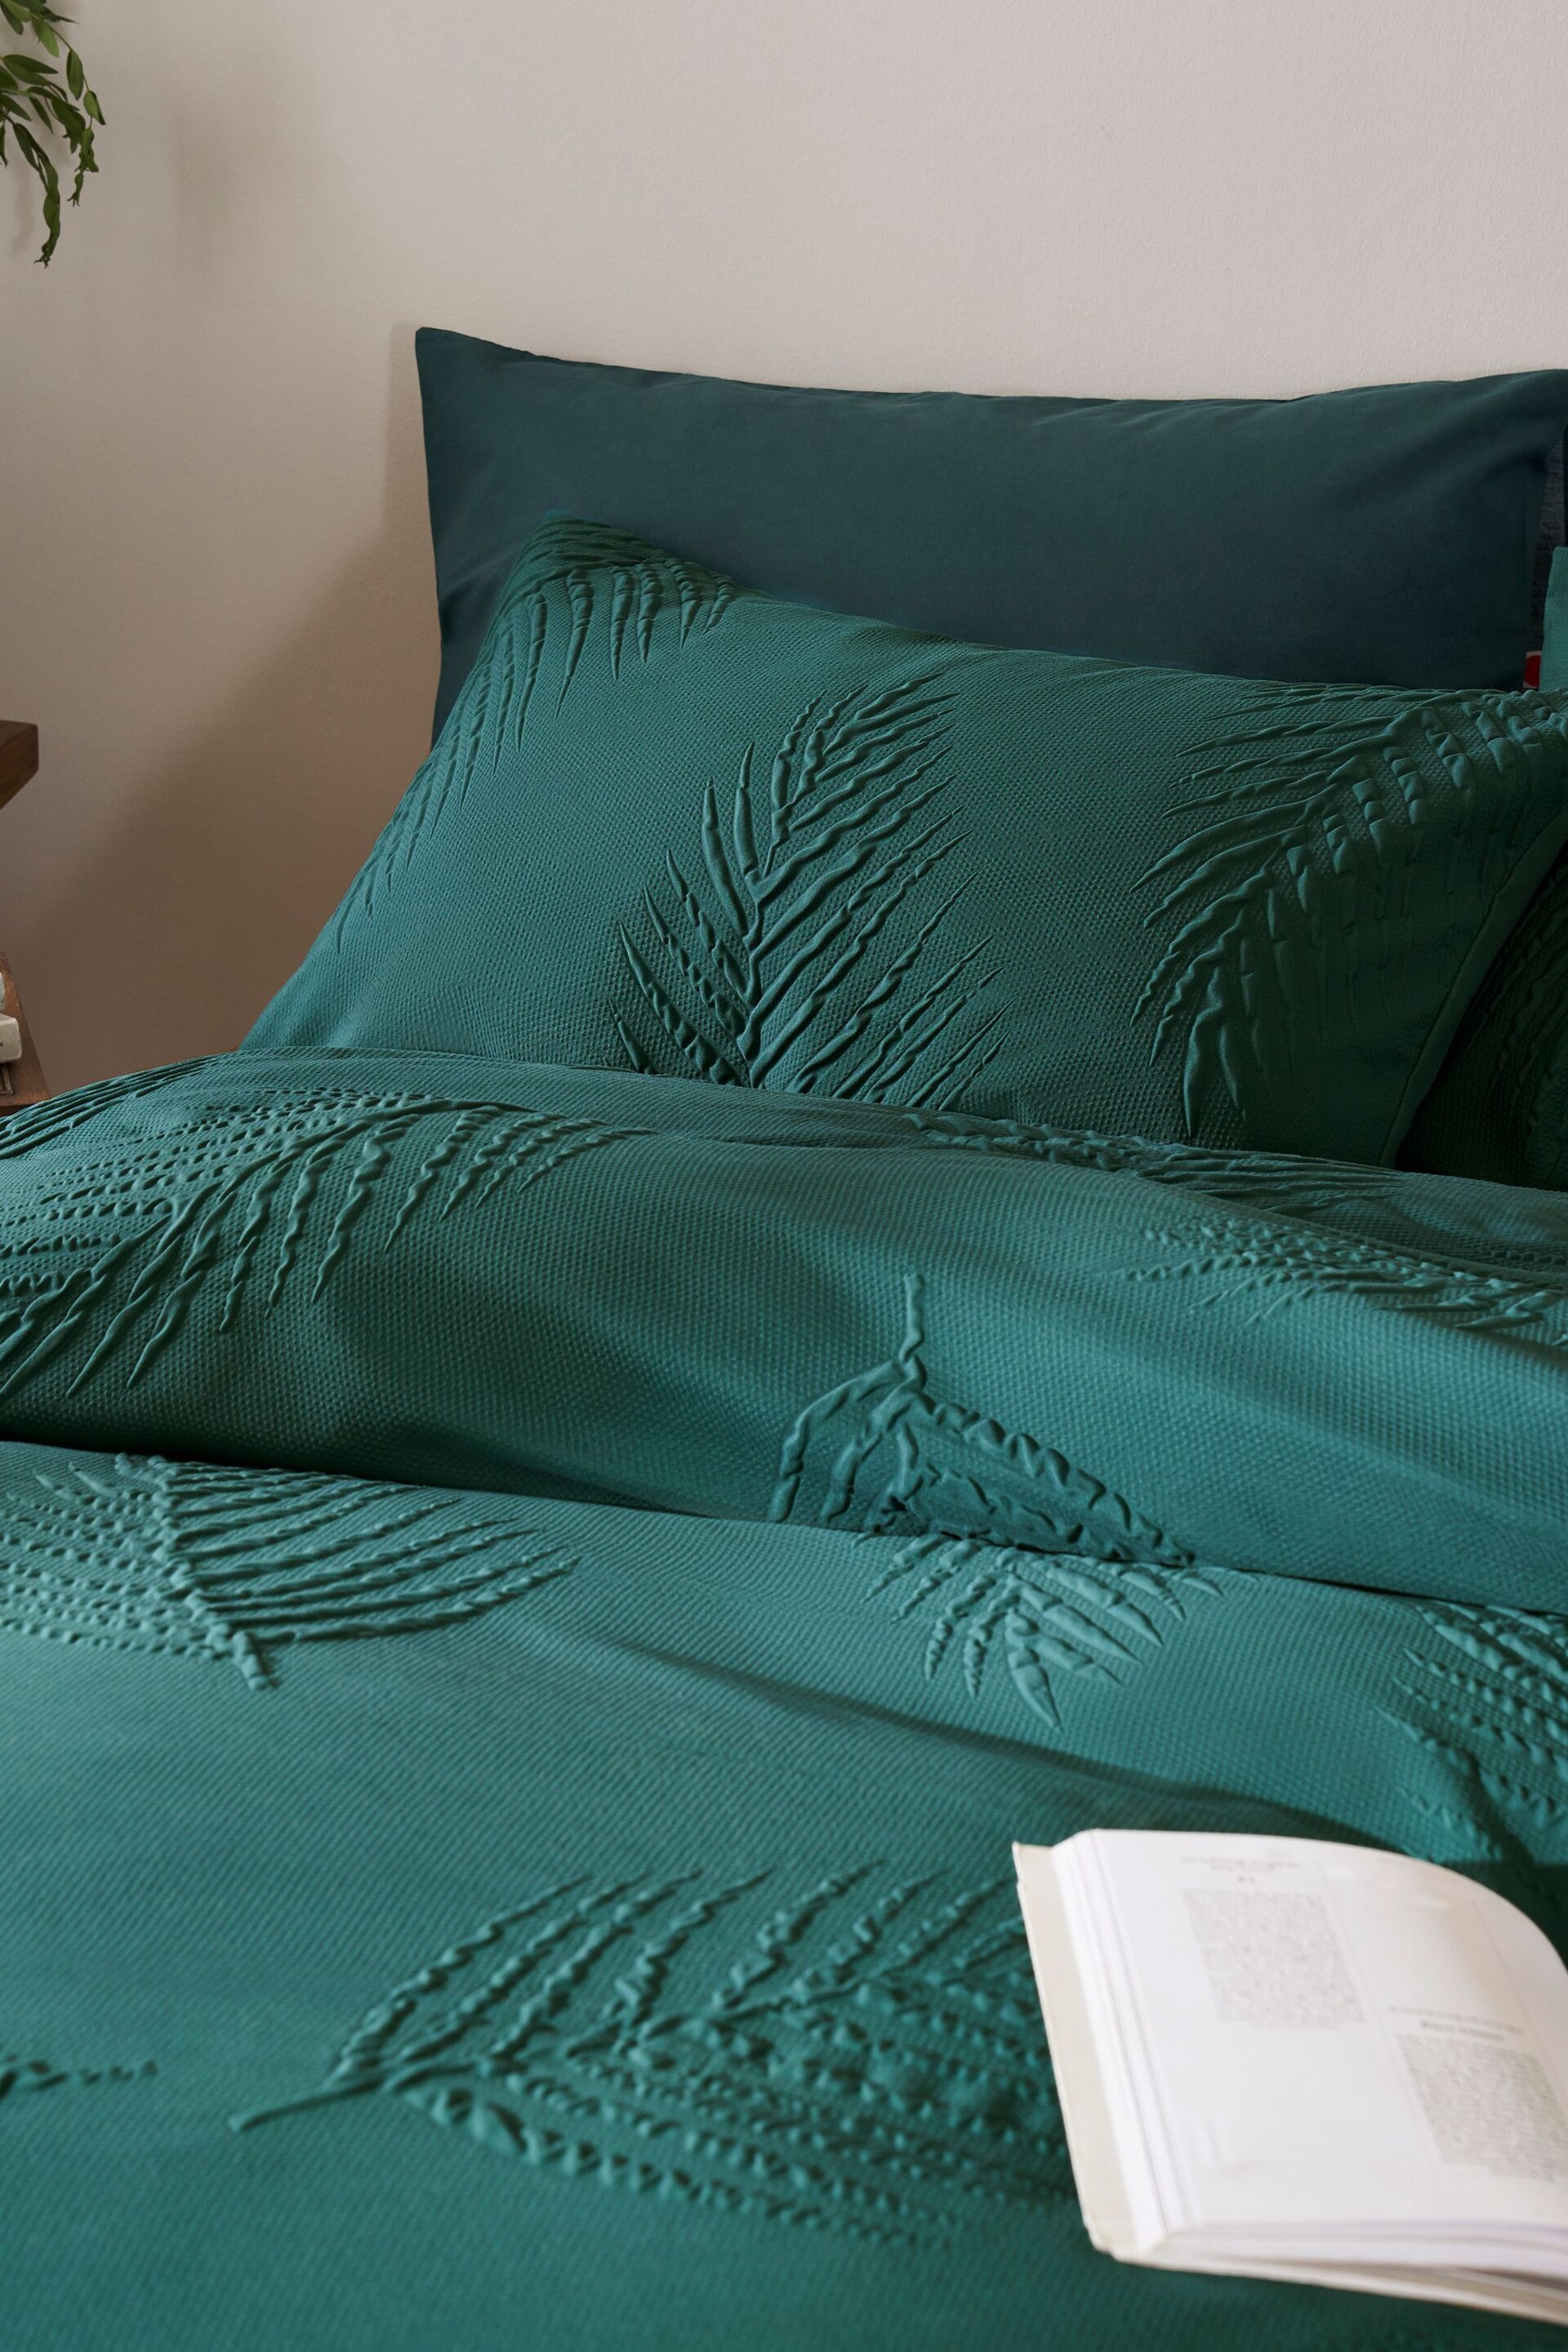 Green Embossed Leaf Duvet Cover and Pillowcase Set - Image 2 of 5